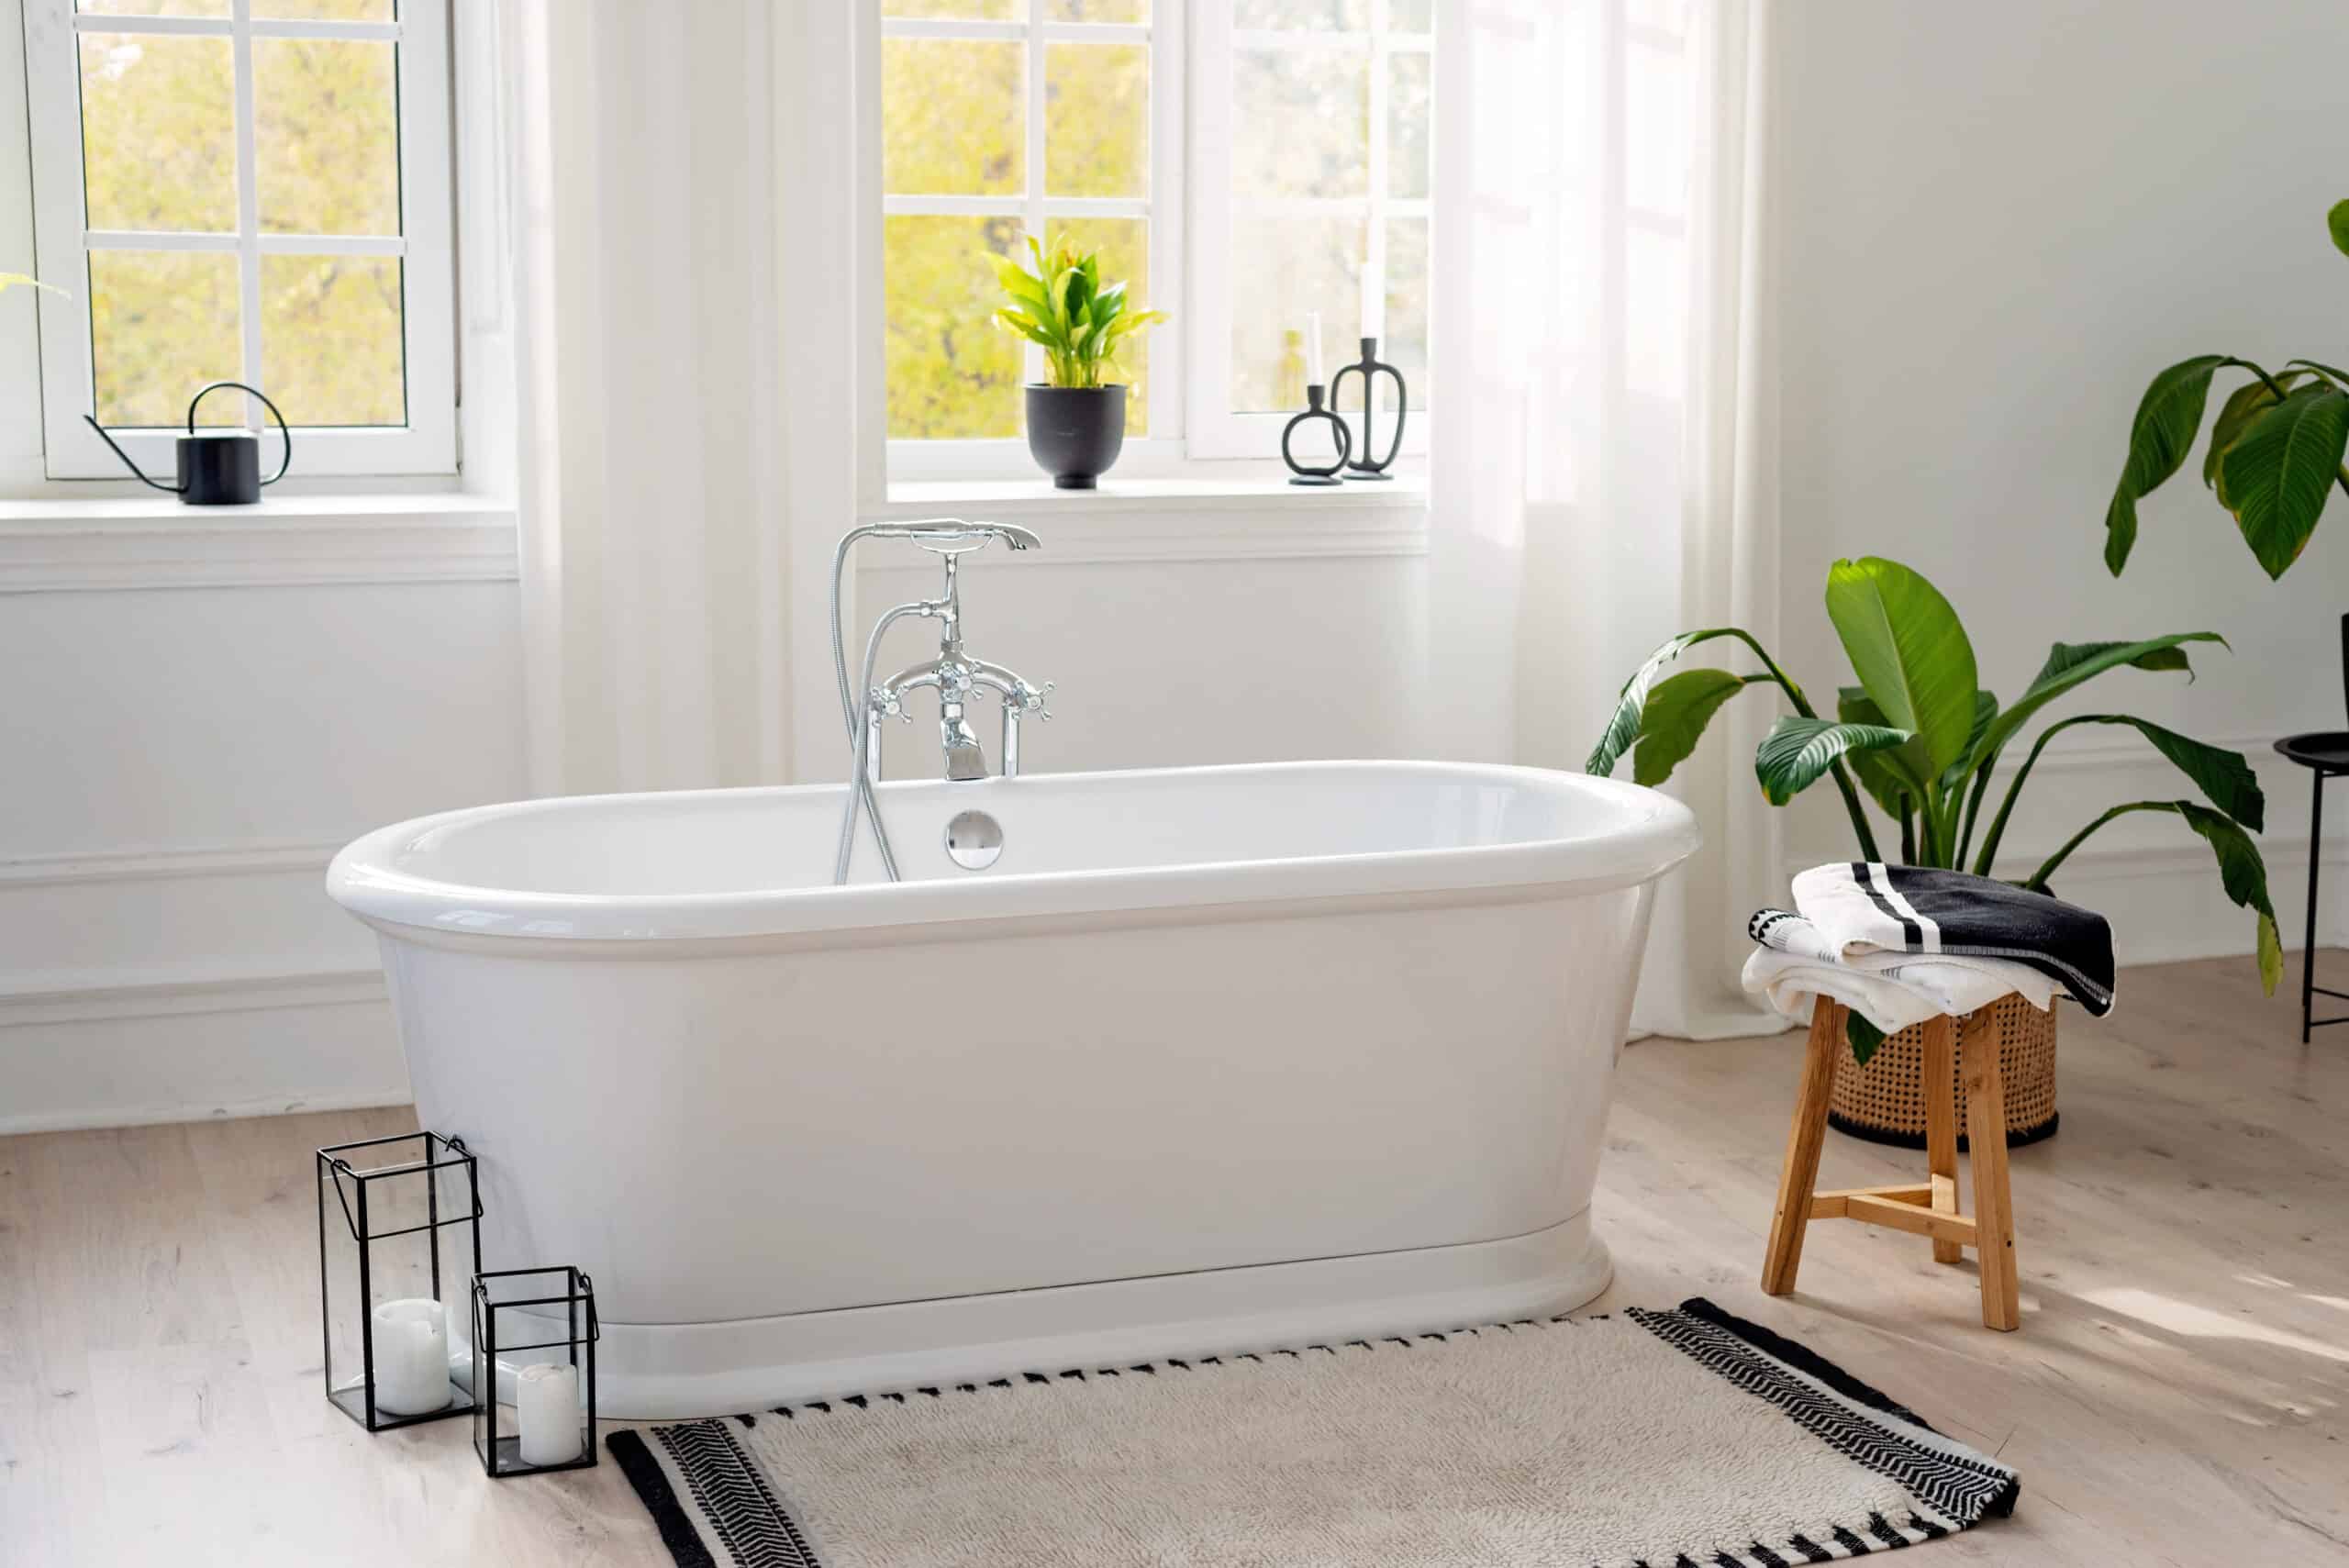 stylish modern bathroom interior. horizontal view of an empty free standing bathtub on a wooden floor in a bright room against the backdrop of a large window and houseplants. soft selective focus.